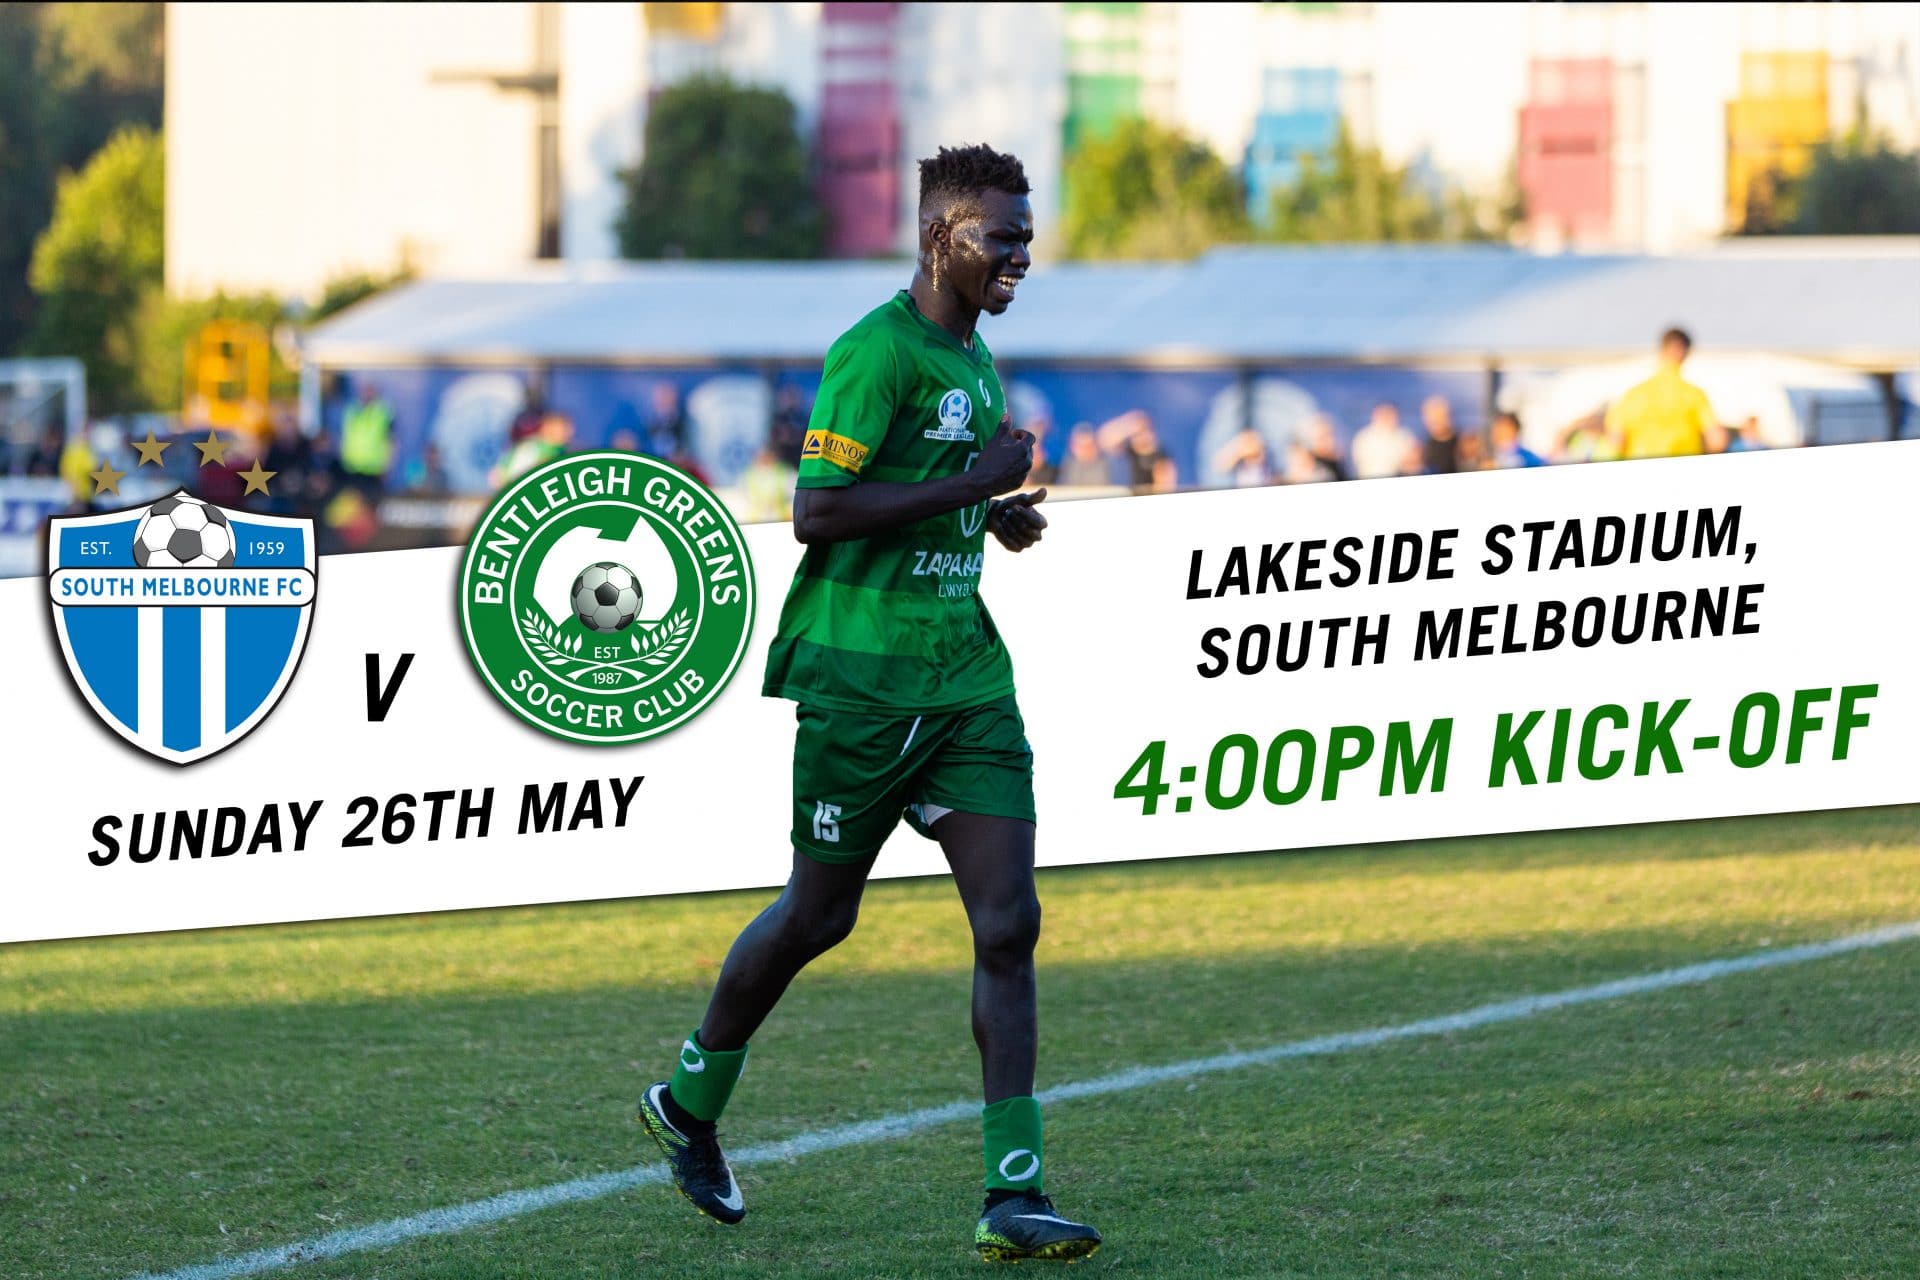 Matchday Vs South Melbourne